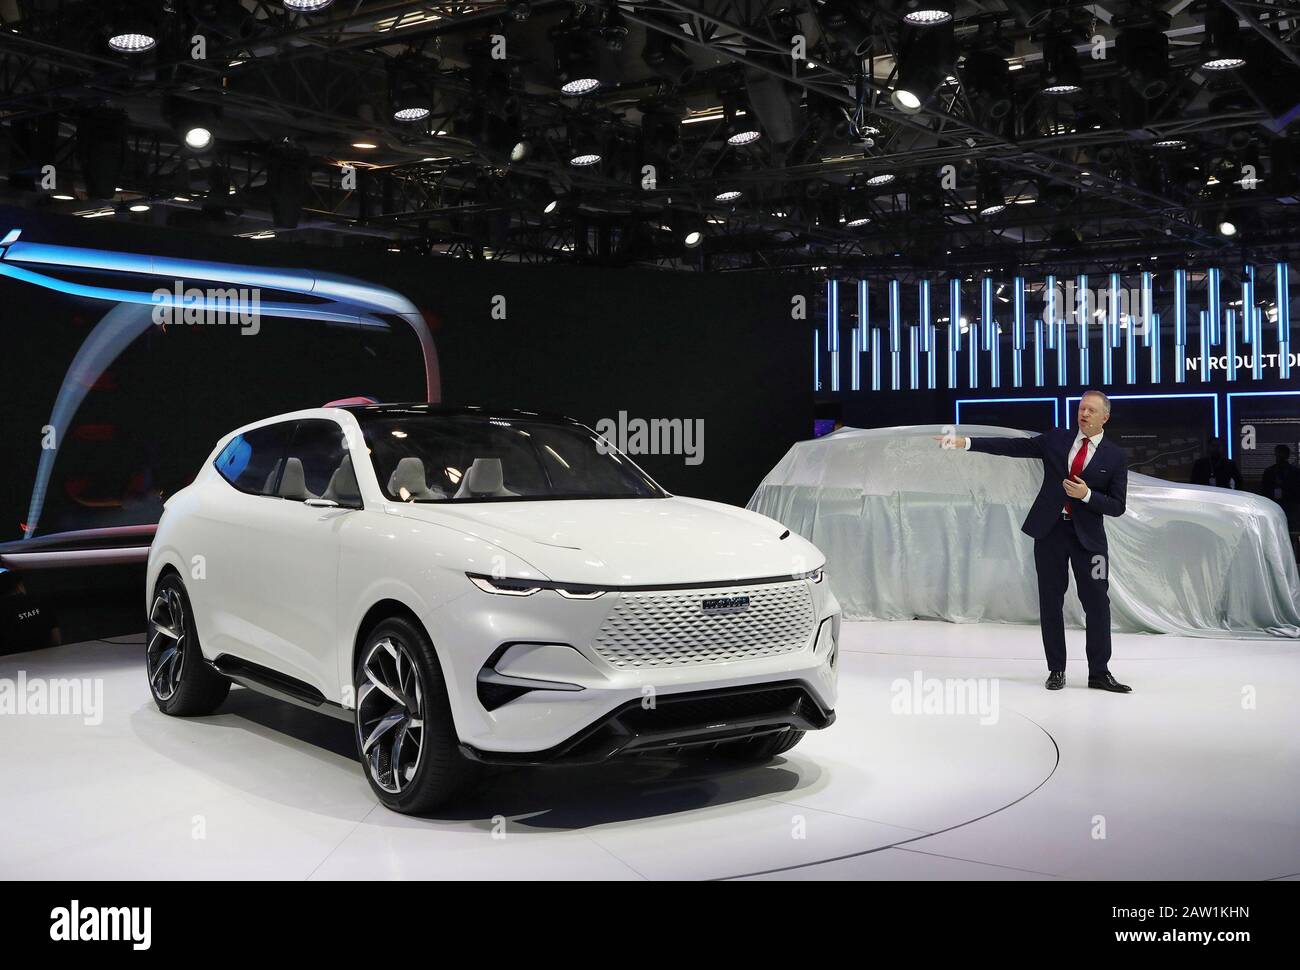 New Delhi, Auto Expo 2020. 7th Feb, 2020. Photo taken on Feb. 5, 2020 shows the Great Wall Motors Haval 2025 Concept, which will be exhibited during the upcoming Auto Expo 2020, in the Greater Noida area of the northern state of Uttar Pradesh in India. The Auto Expo 2020 will officially kick off here on Feb. 7, 2020. Credit: Str/Xinhua/Alamy Live News Stock Photo